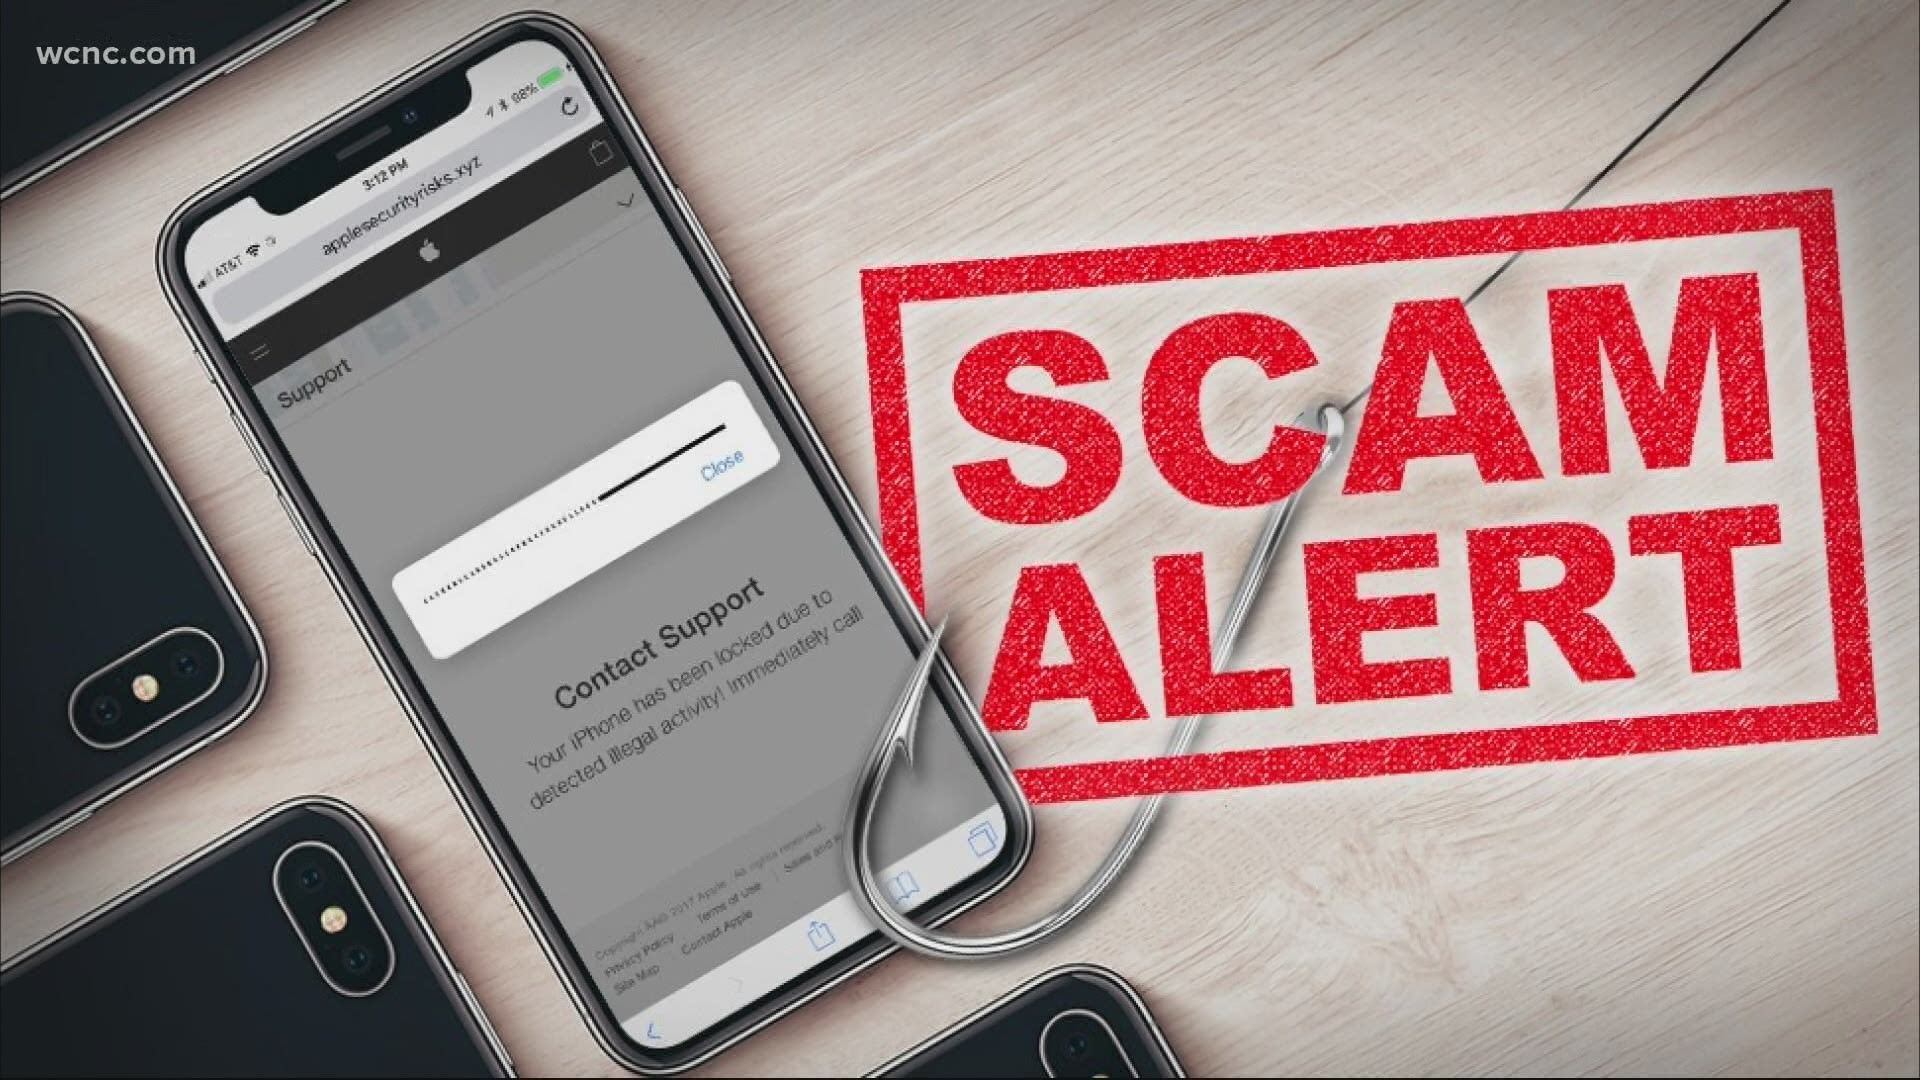 If you are getting calls that say they are from the Social Security Administration, don't fall for it, it's a scam.